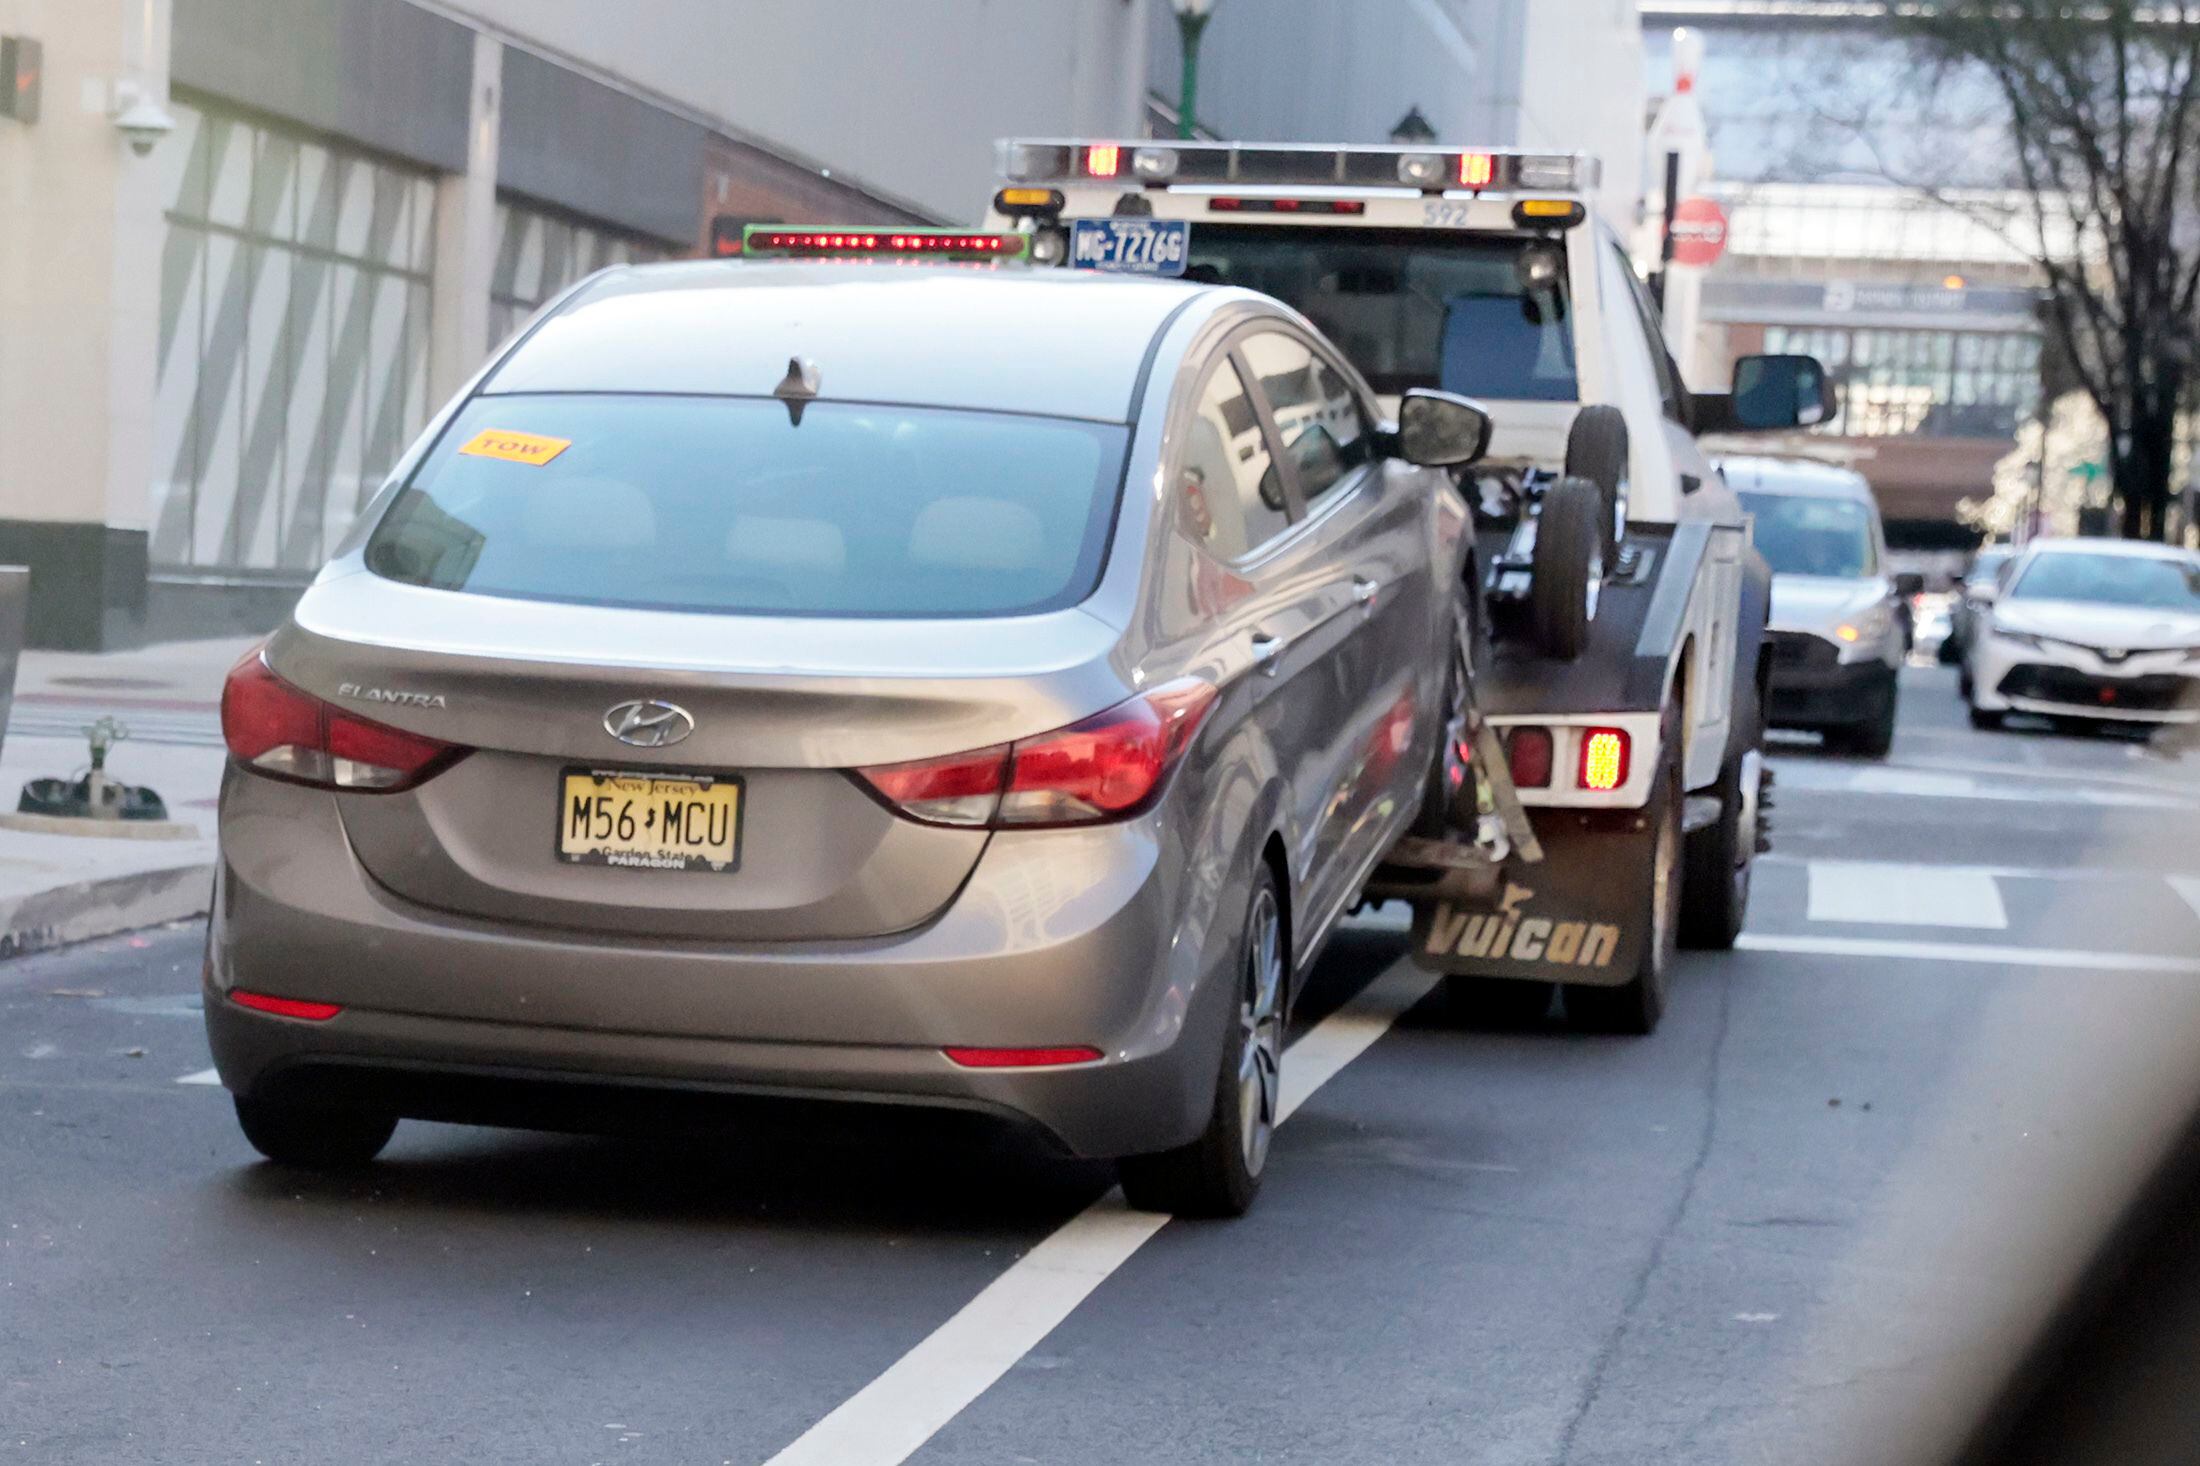 How Long Can A Tow Company Keep Your Car?